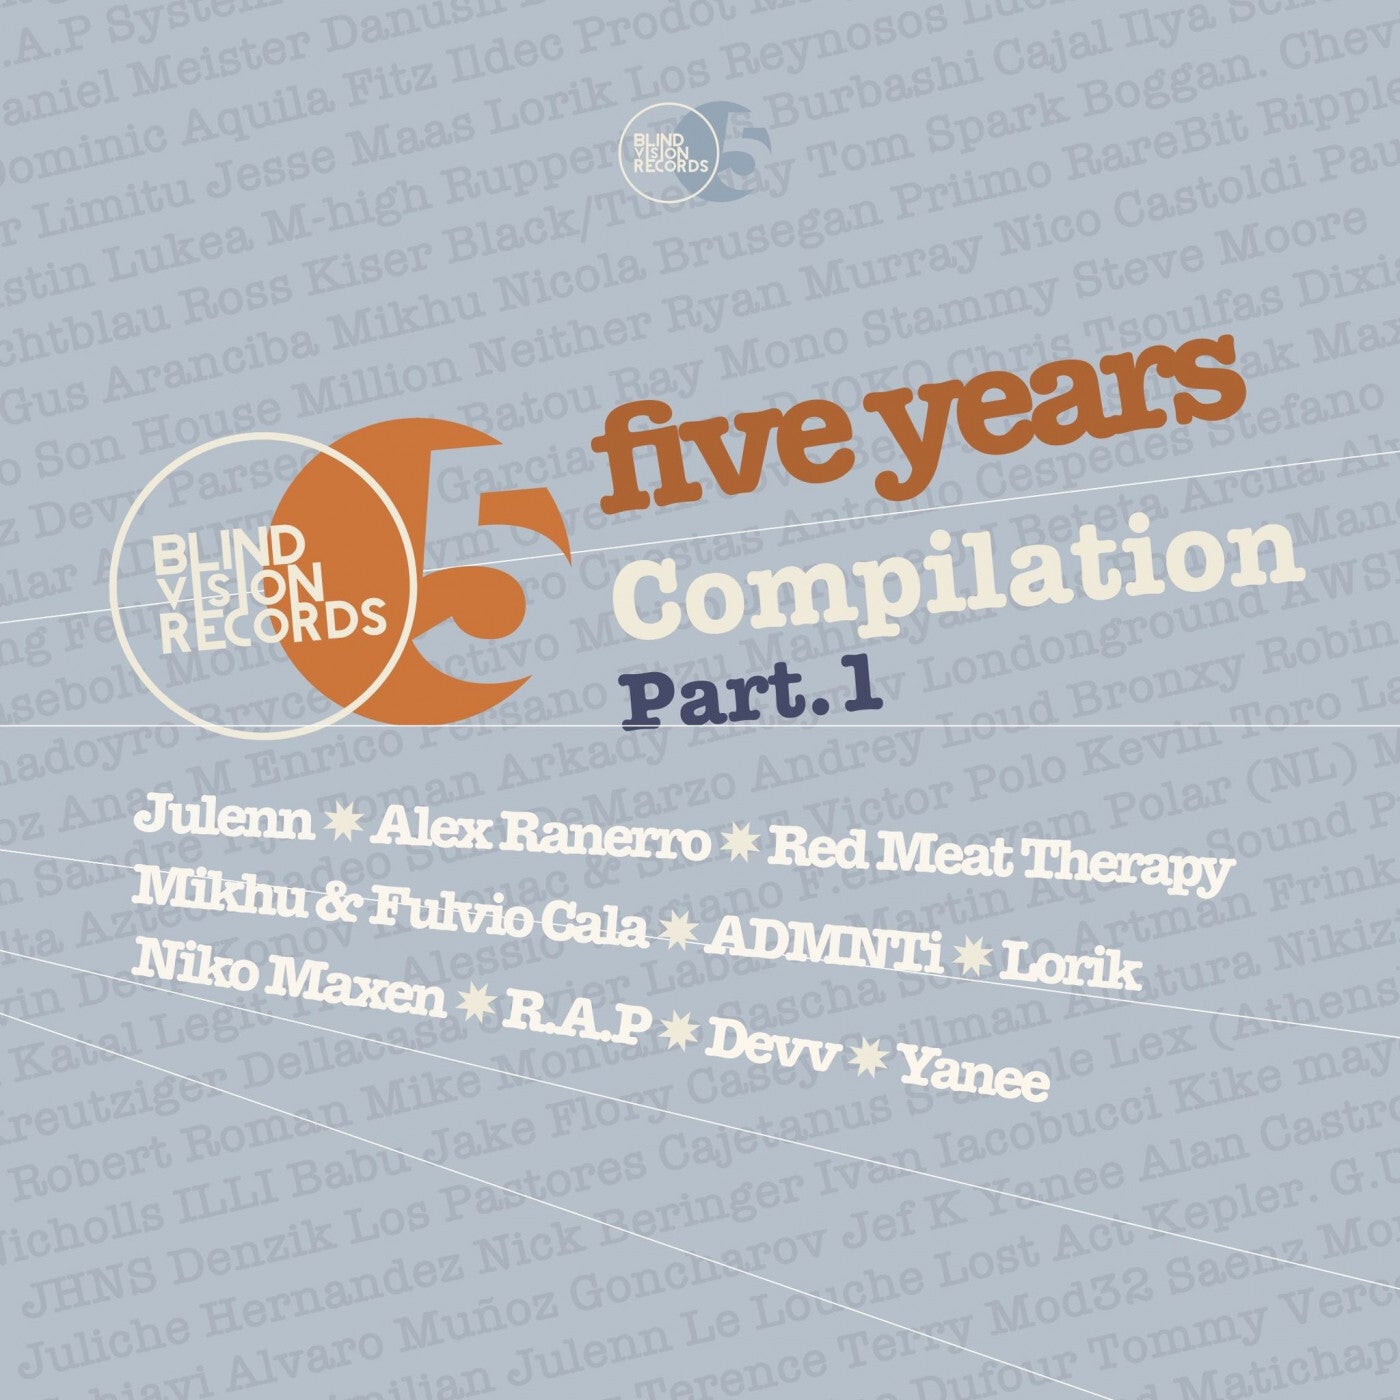 Five Years Compilation Part 1